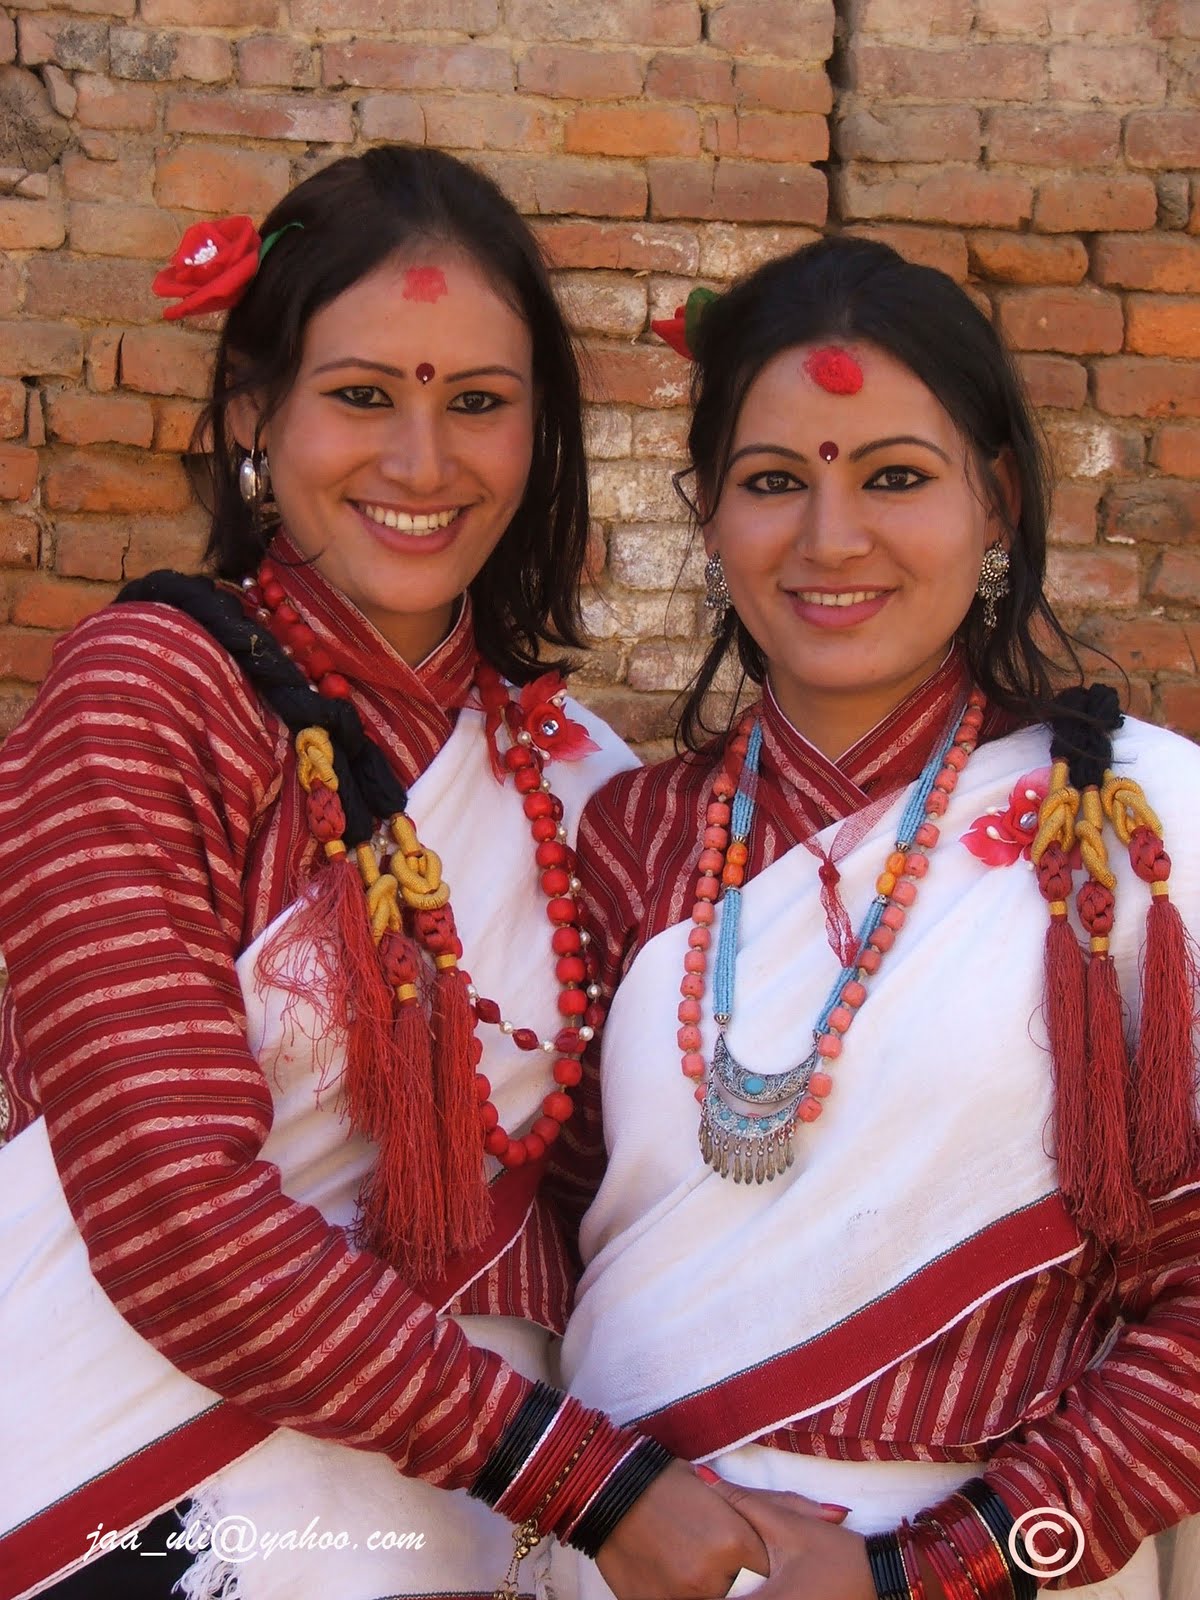 Know Nepal Through Pictures Nepalese People Custome And Festival Brief ...